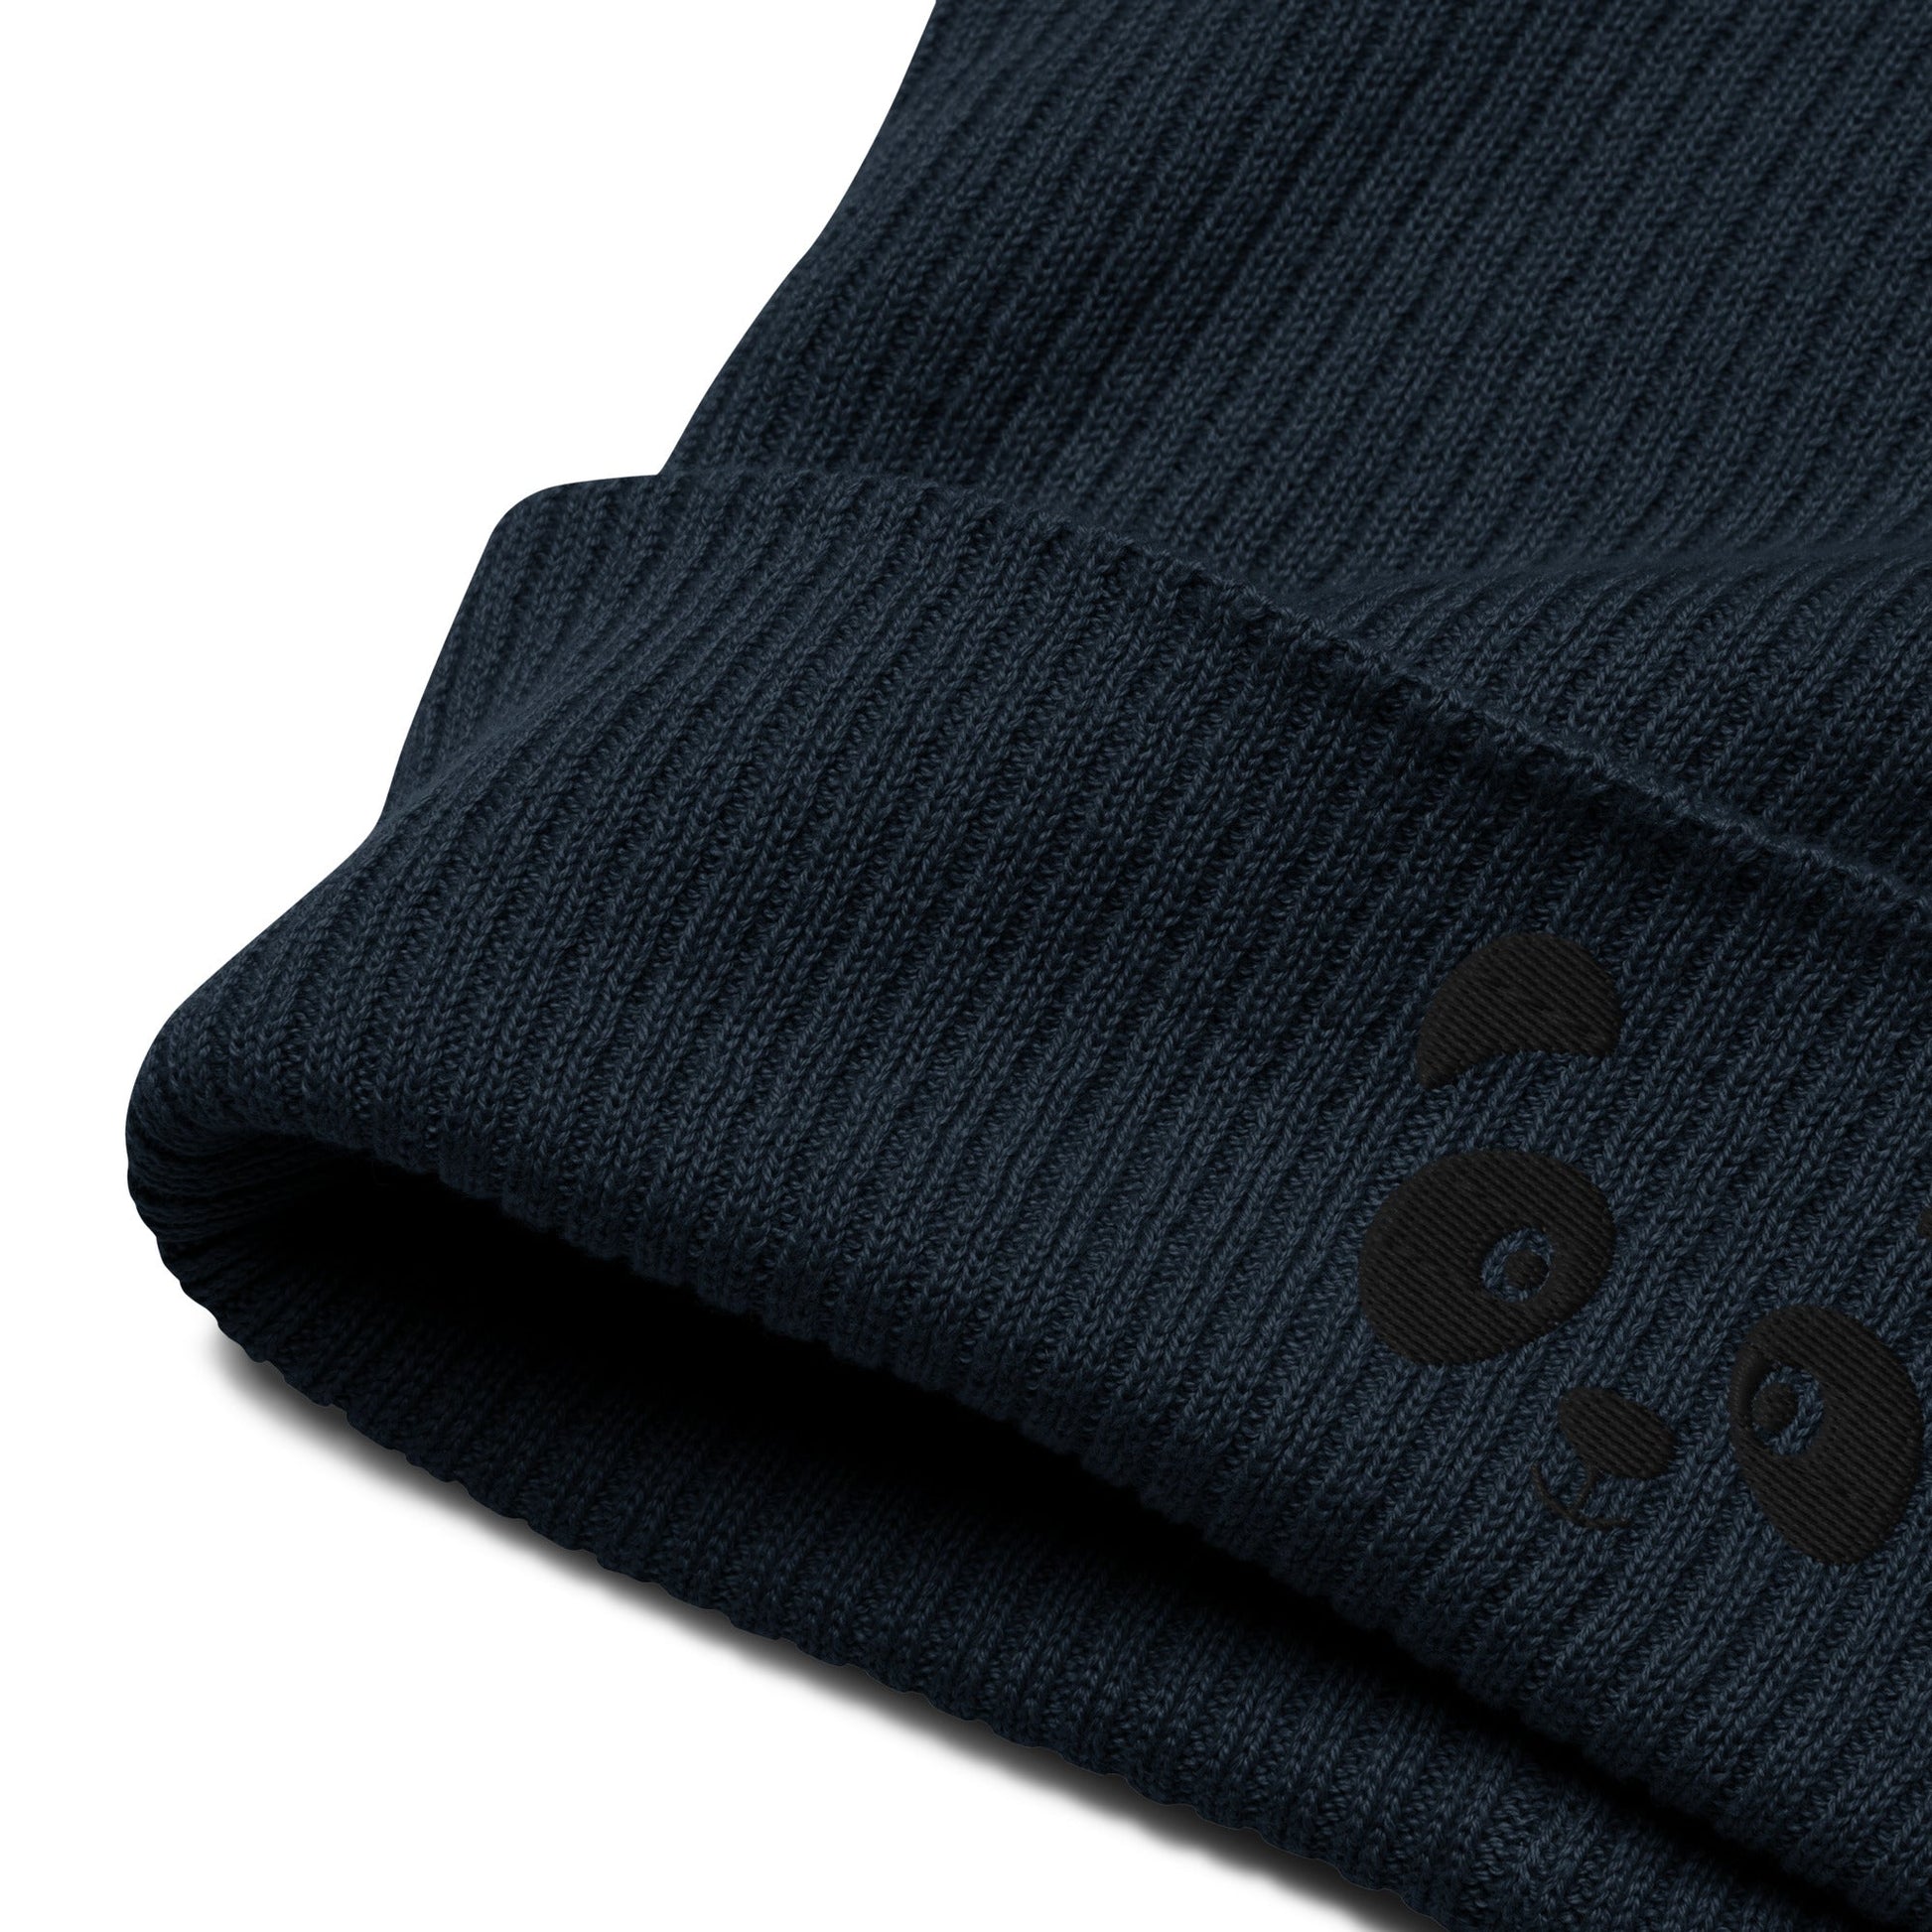 Panda face black embroidered, organic cotton ribbed beanie-43